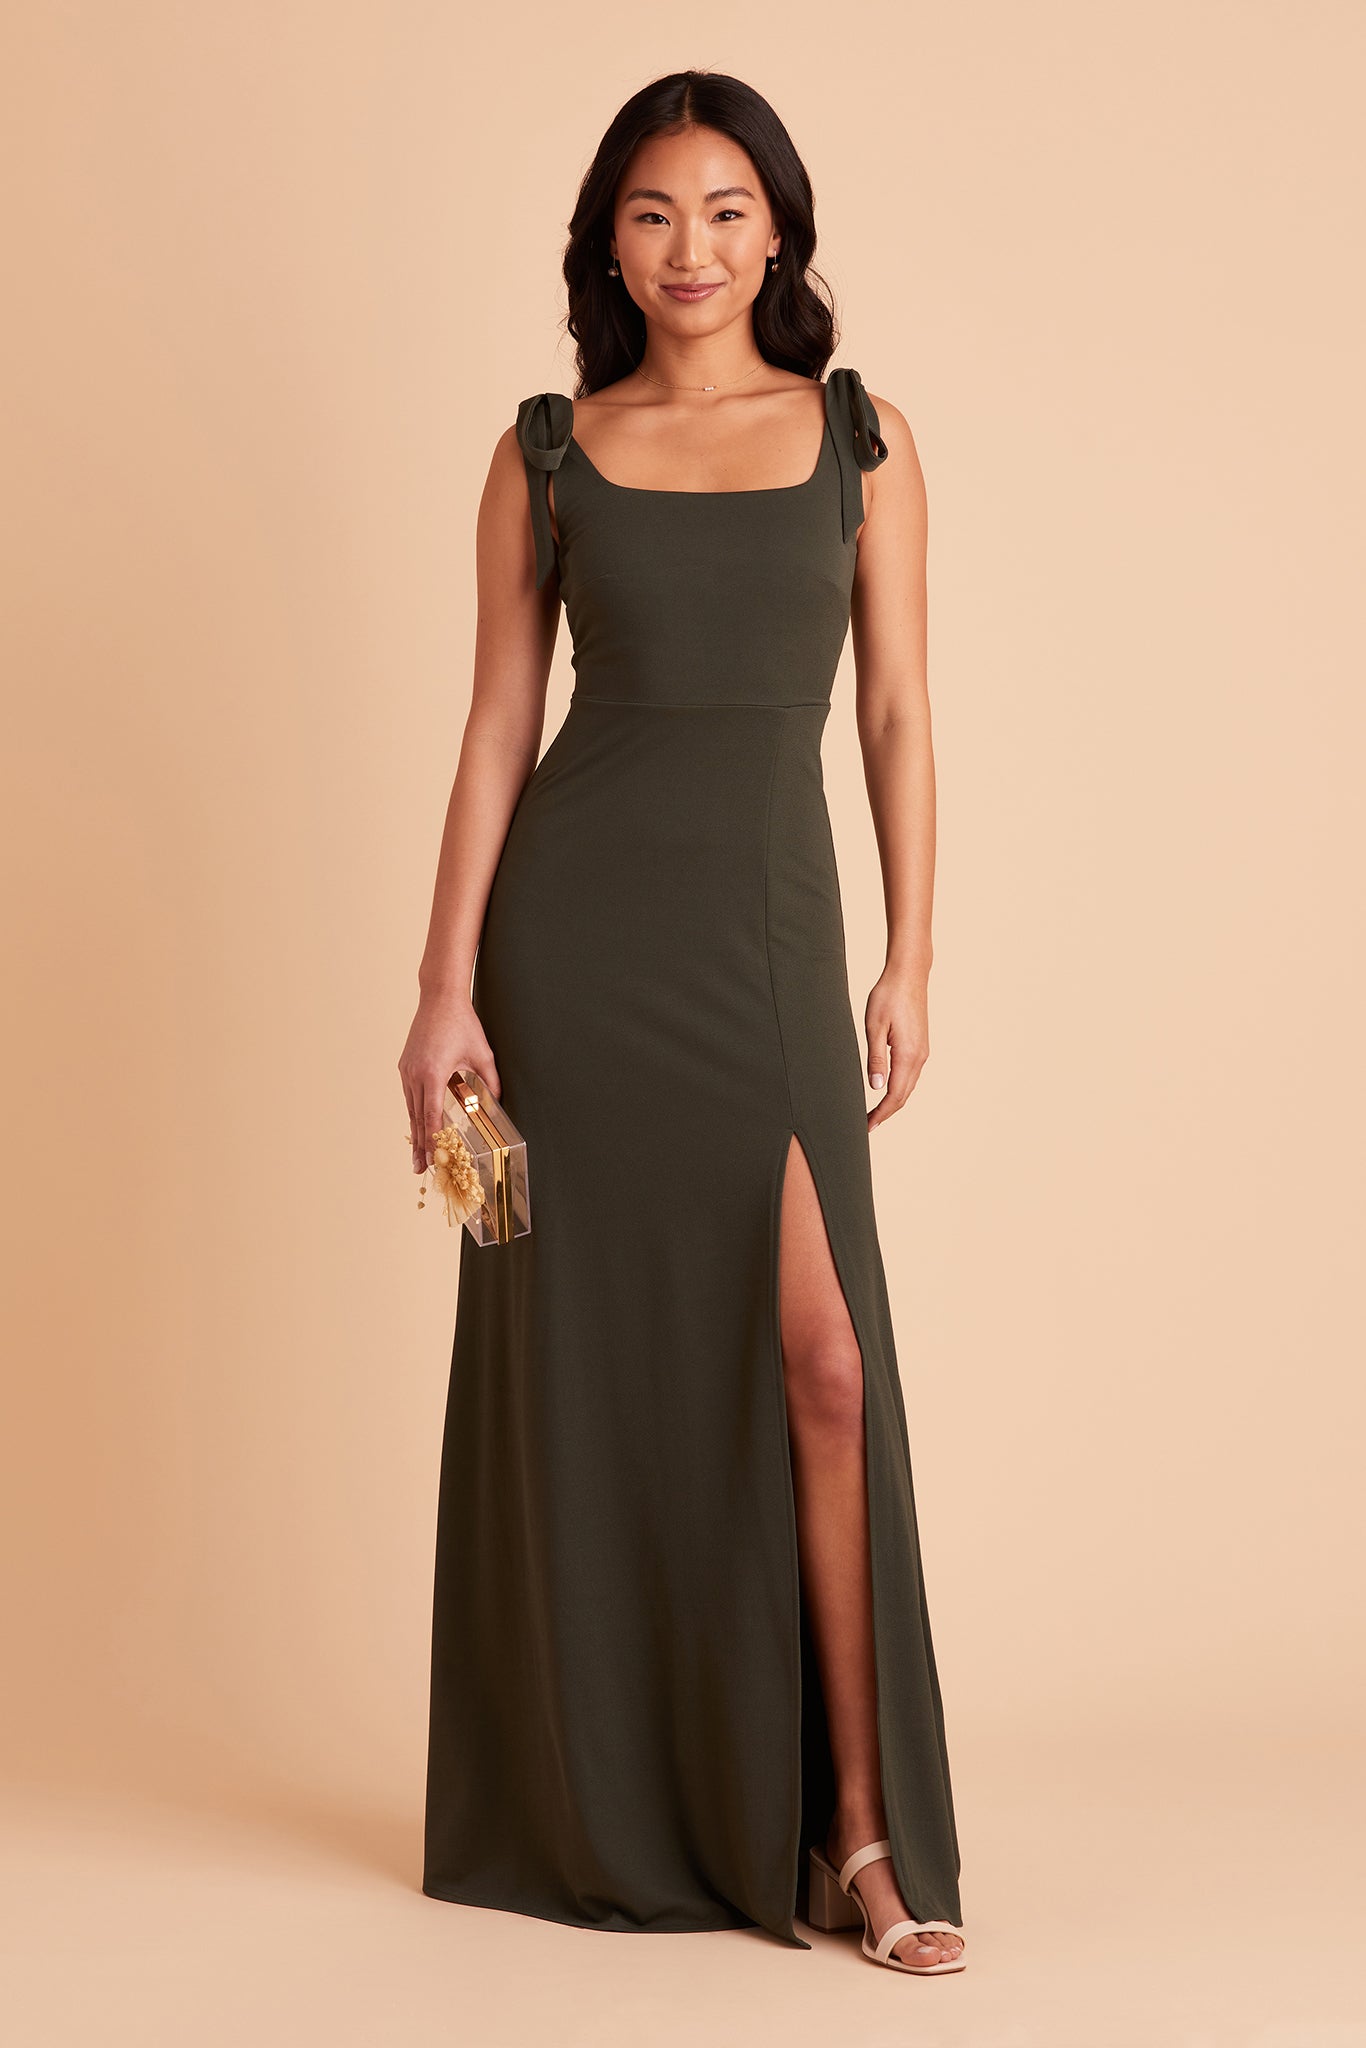 Alex convertible bridesmaid dress with slit in olive crepe by Birdy Grey, front view